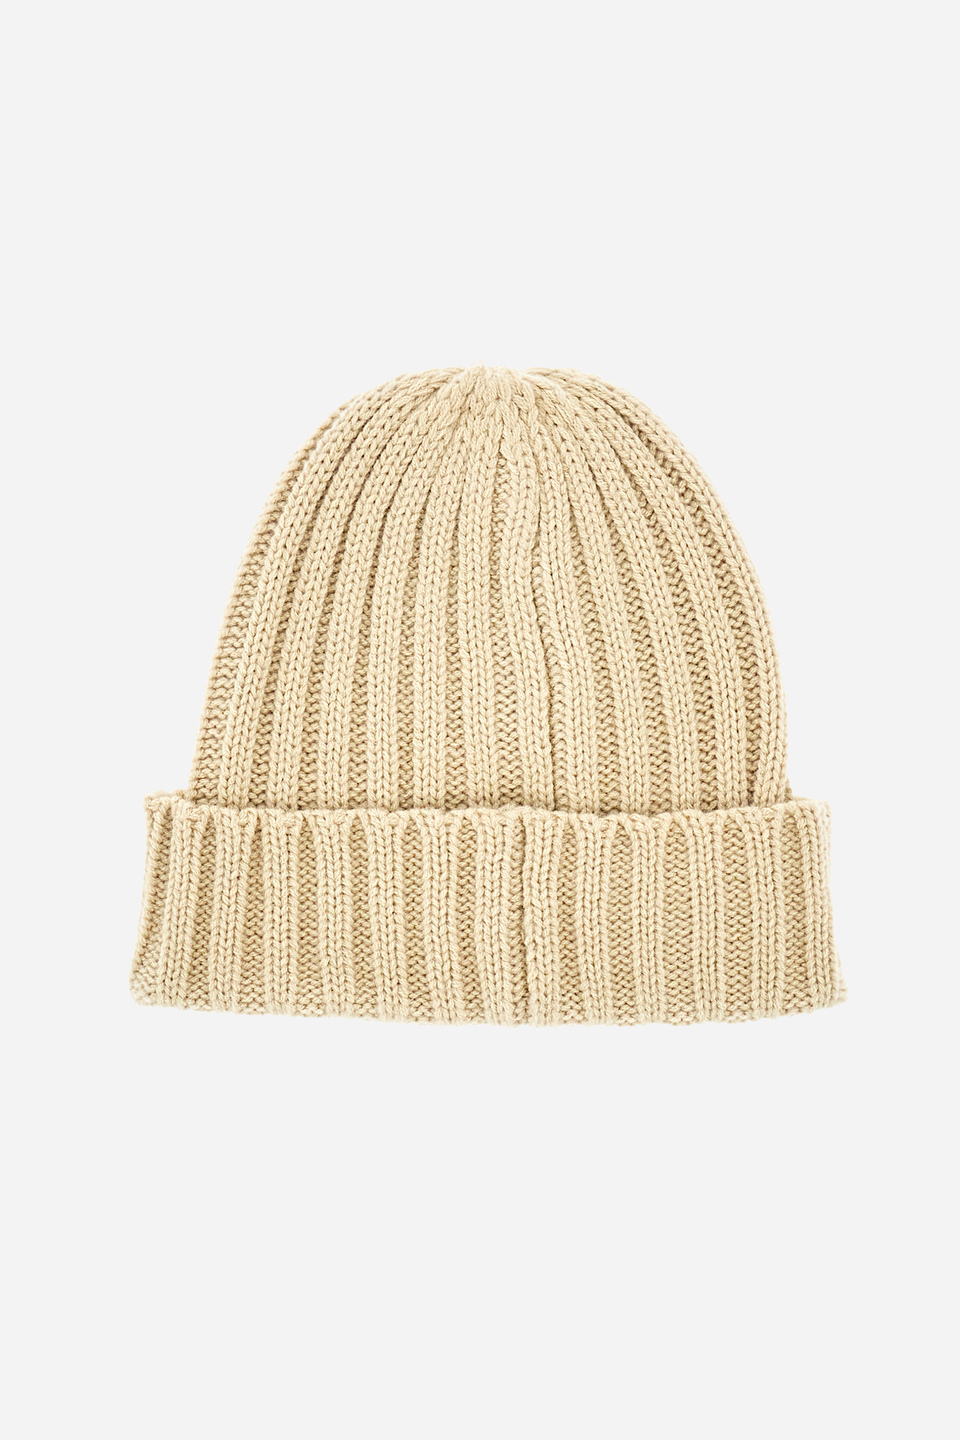 Beanie unisex a righe in tessuto polylana | La Martina - Official Online Shop